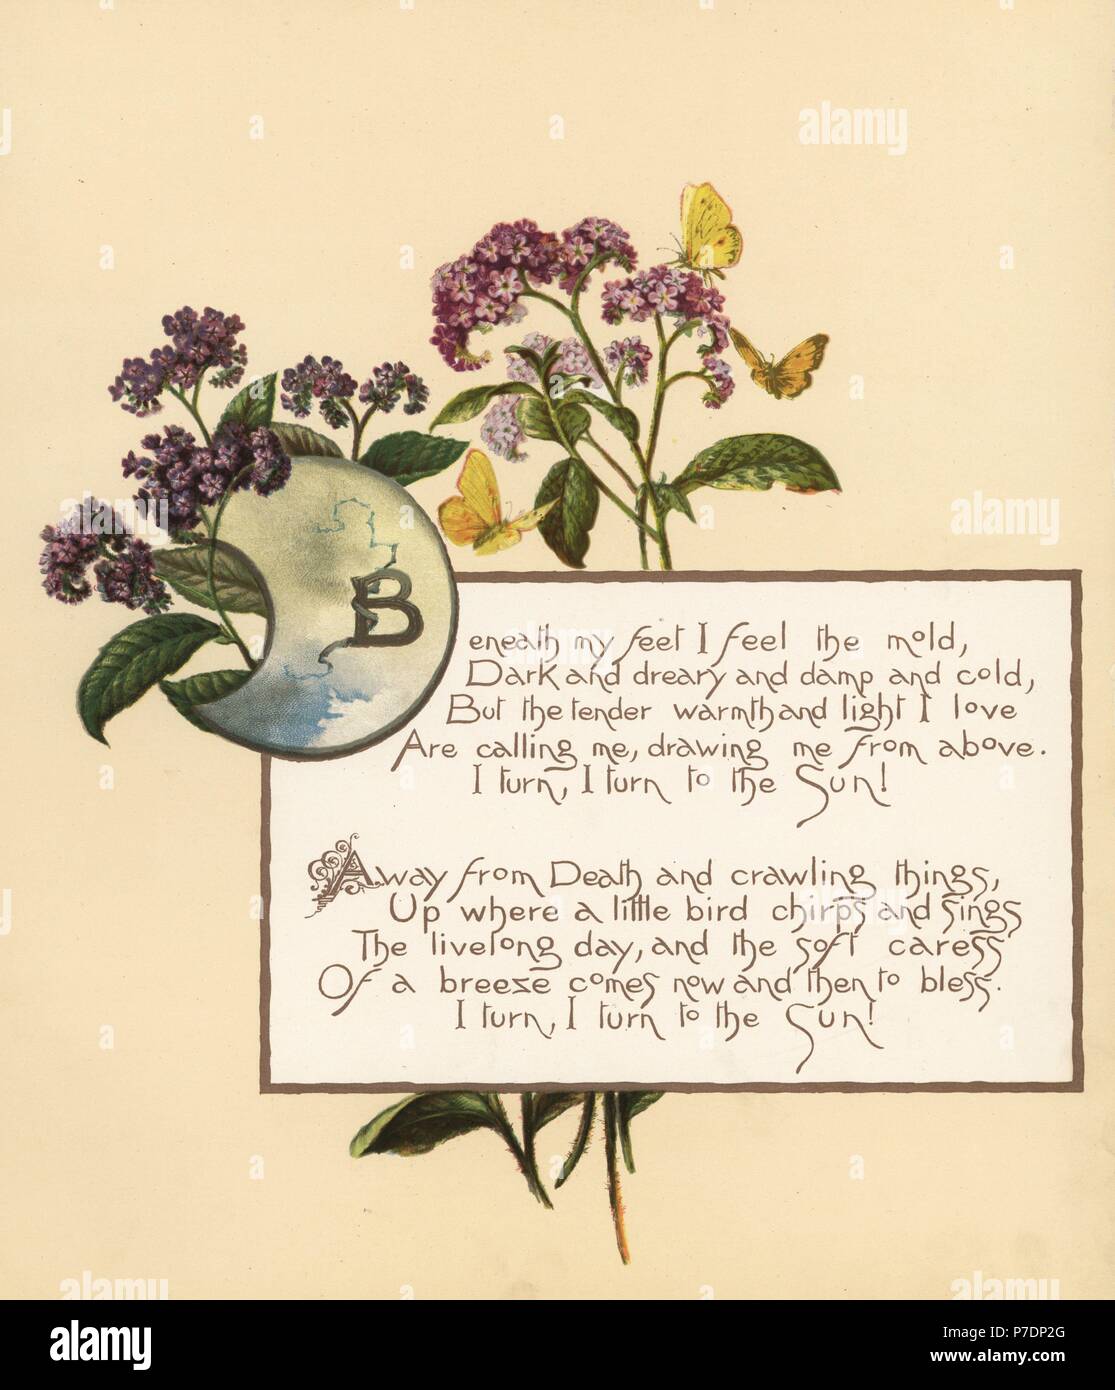 Calligraphic poem in box with flowers and butterflies. Chromolithograph by Louis Prang from Alice Ward Bailey's Flower Fancies, Boston, 1889. Illustrated by Lucy Baily, Eleanor Ecob Morse, Olive Whitney, Ellen Fisher, Fidelia Bridges, C. Ryan and F. Schuyler Mathews. Stock Photo